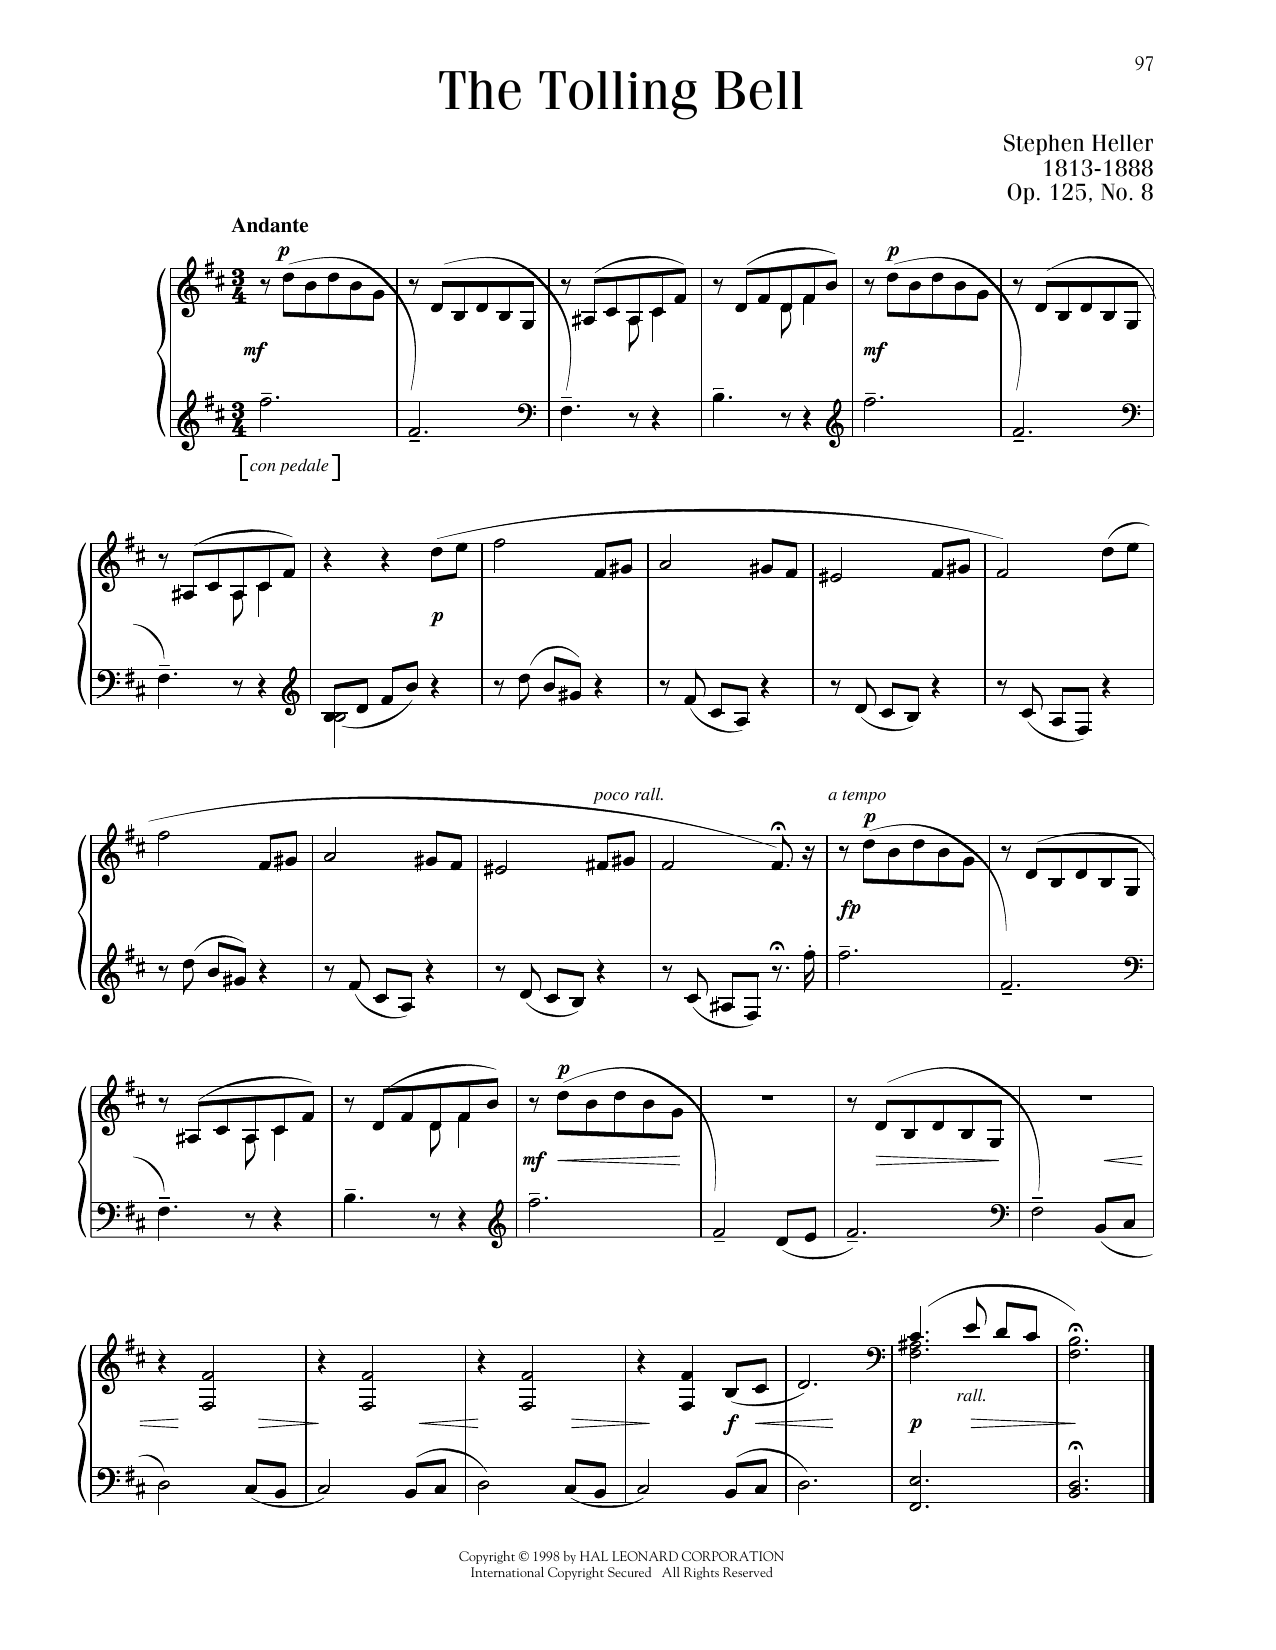 Stephen Heller The Tolling Bell, Op. 125, No. 8 sheet music notes printable PDF score